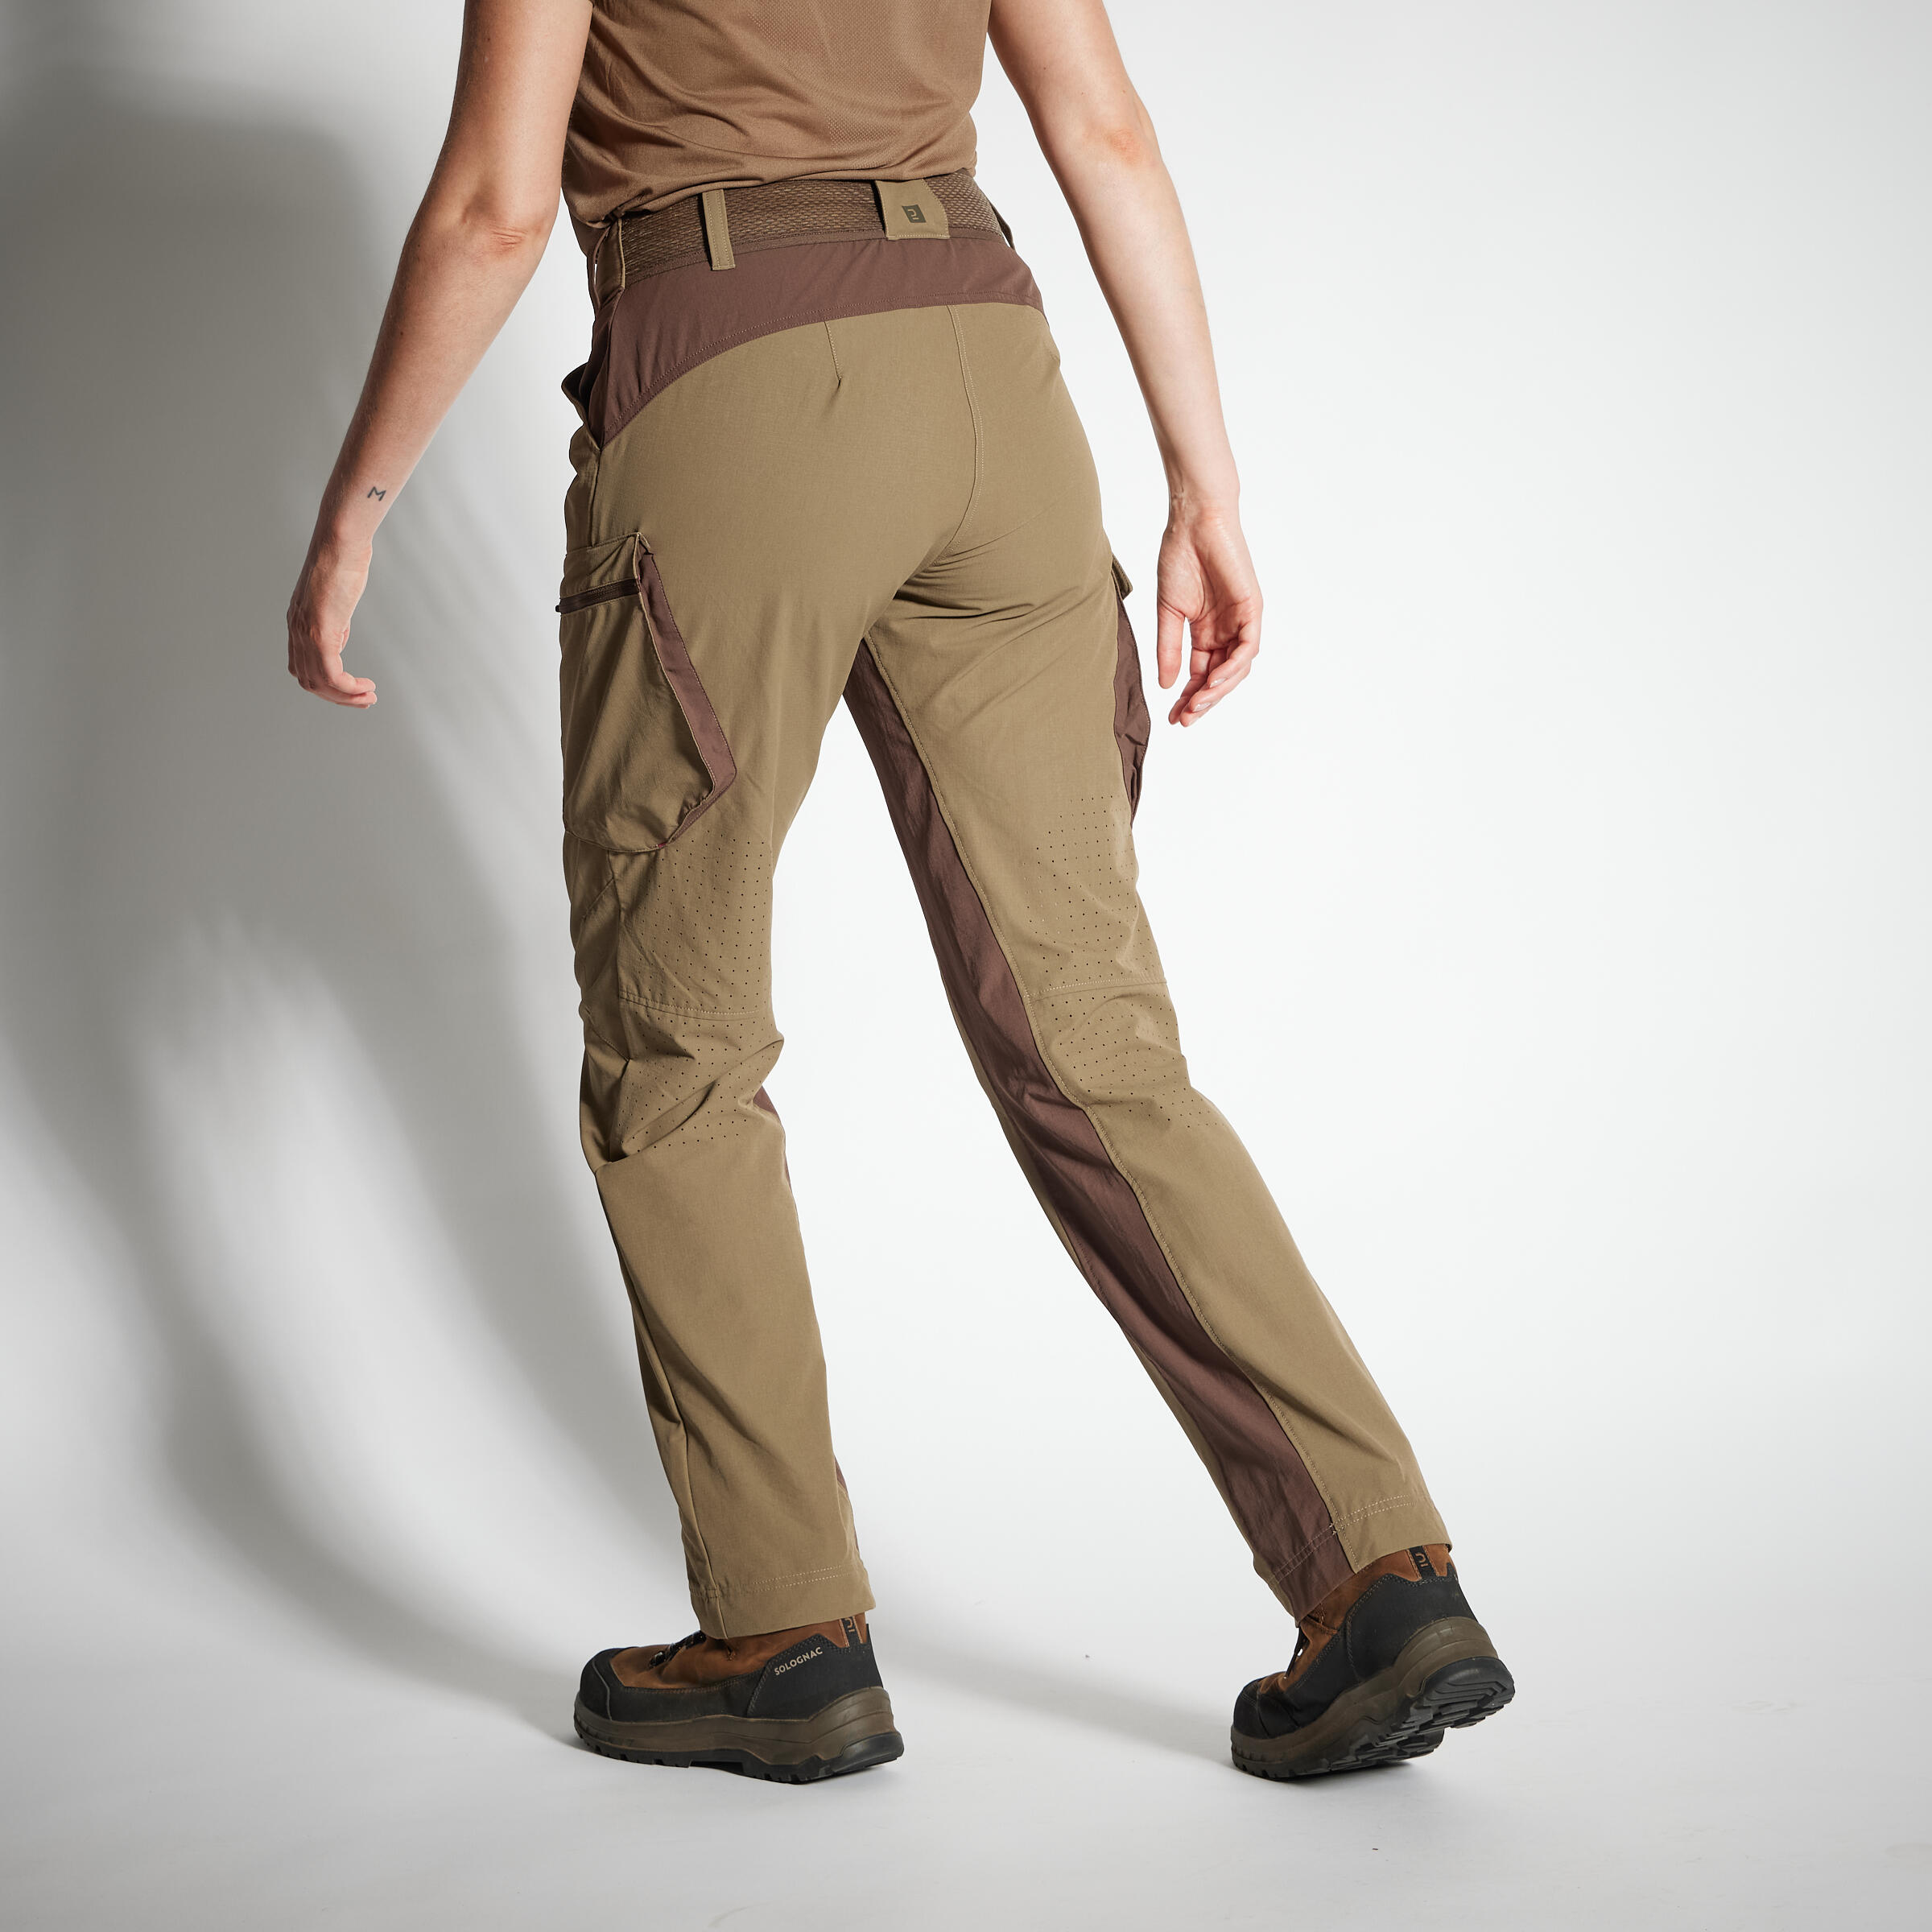 WOMEN'S TROUSERS 500 LIGHTWEIGHT BREATHABLE BROWN 1/8